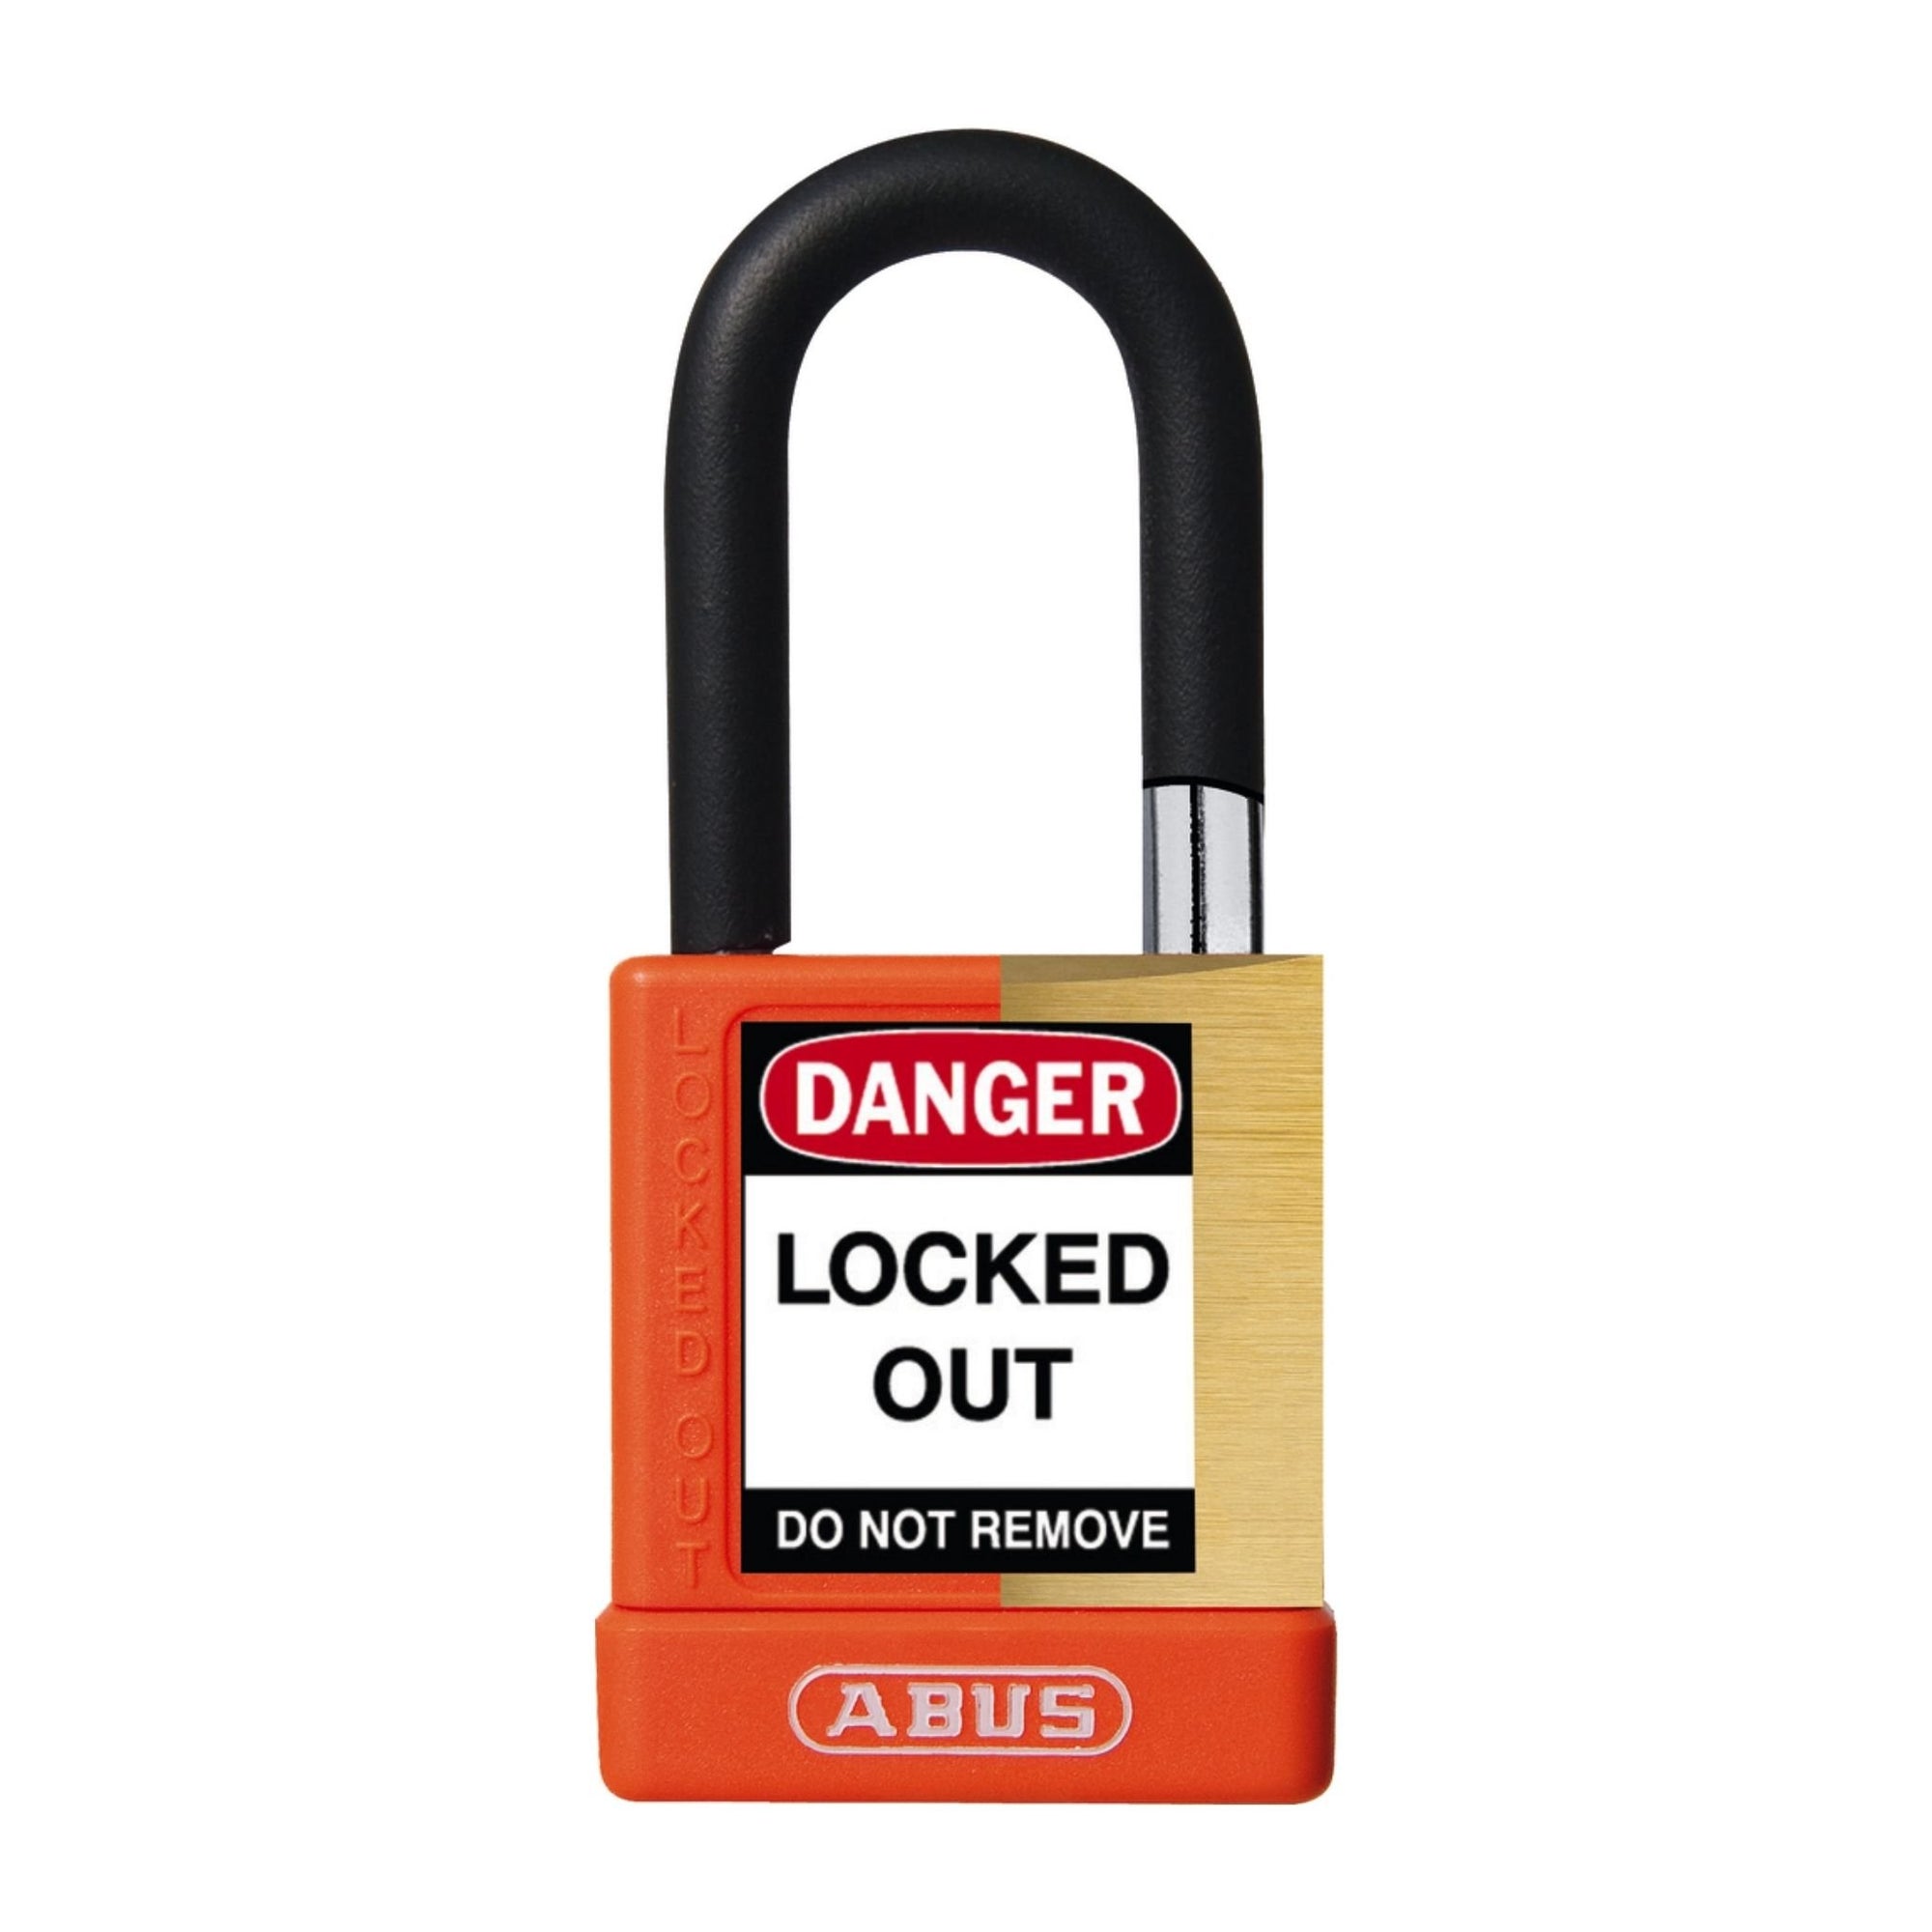 The Abus Sportflex 2504 Lock Requests that You Don't Steal This